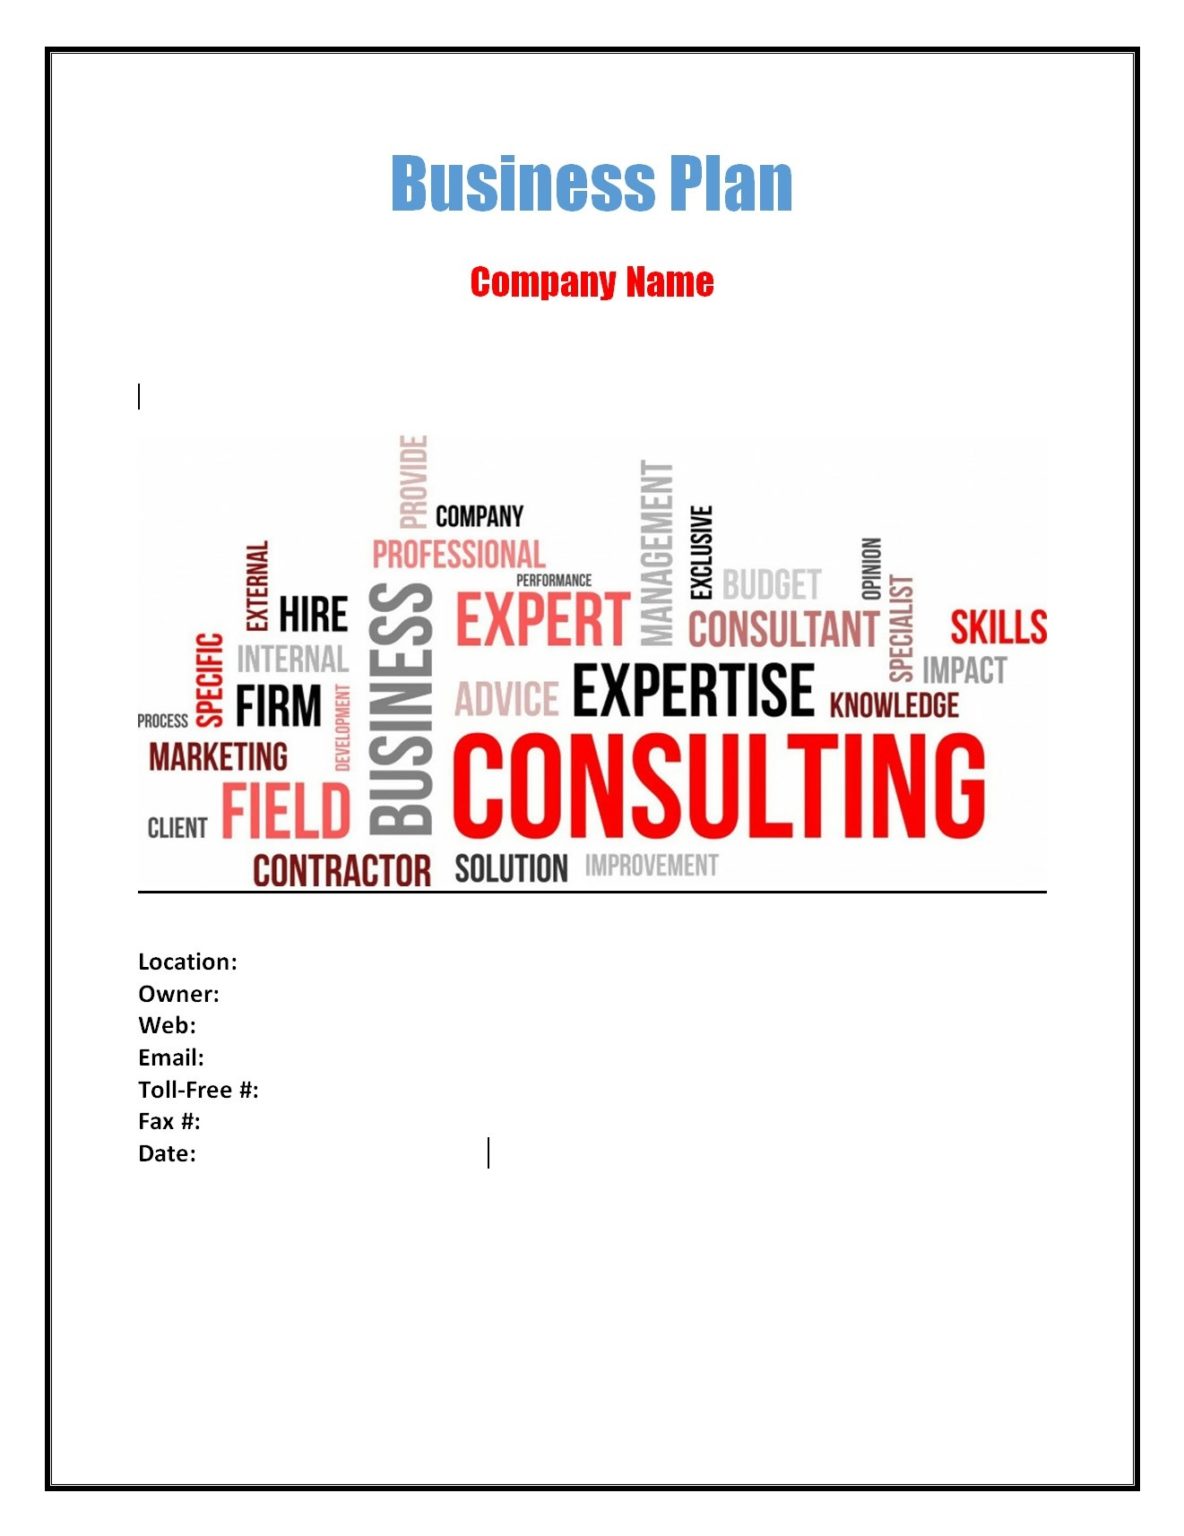 sample business plan for consulting company